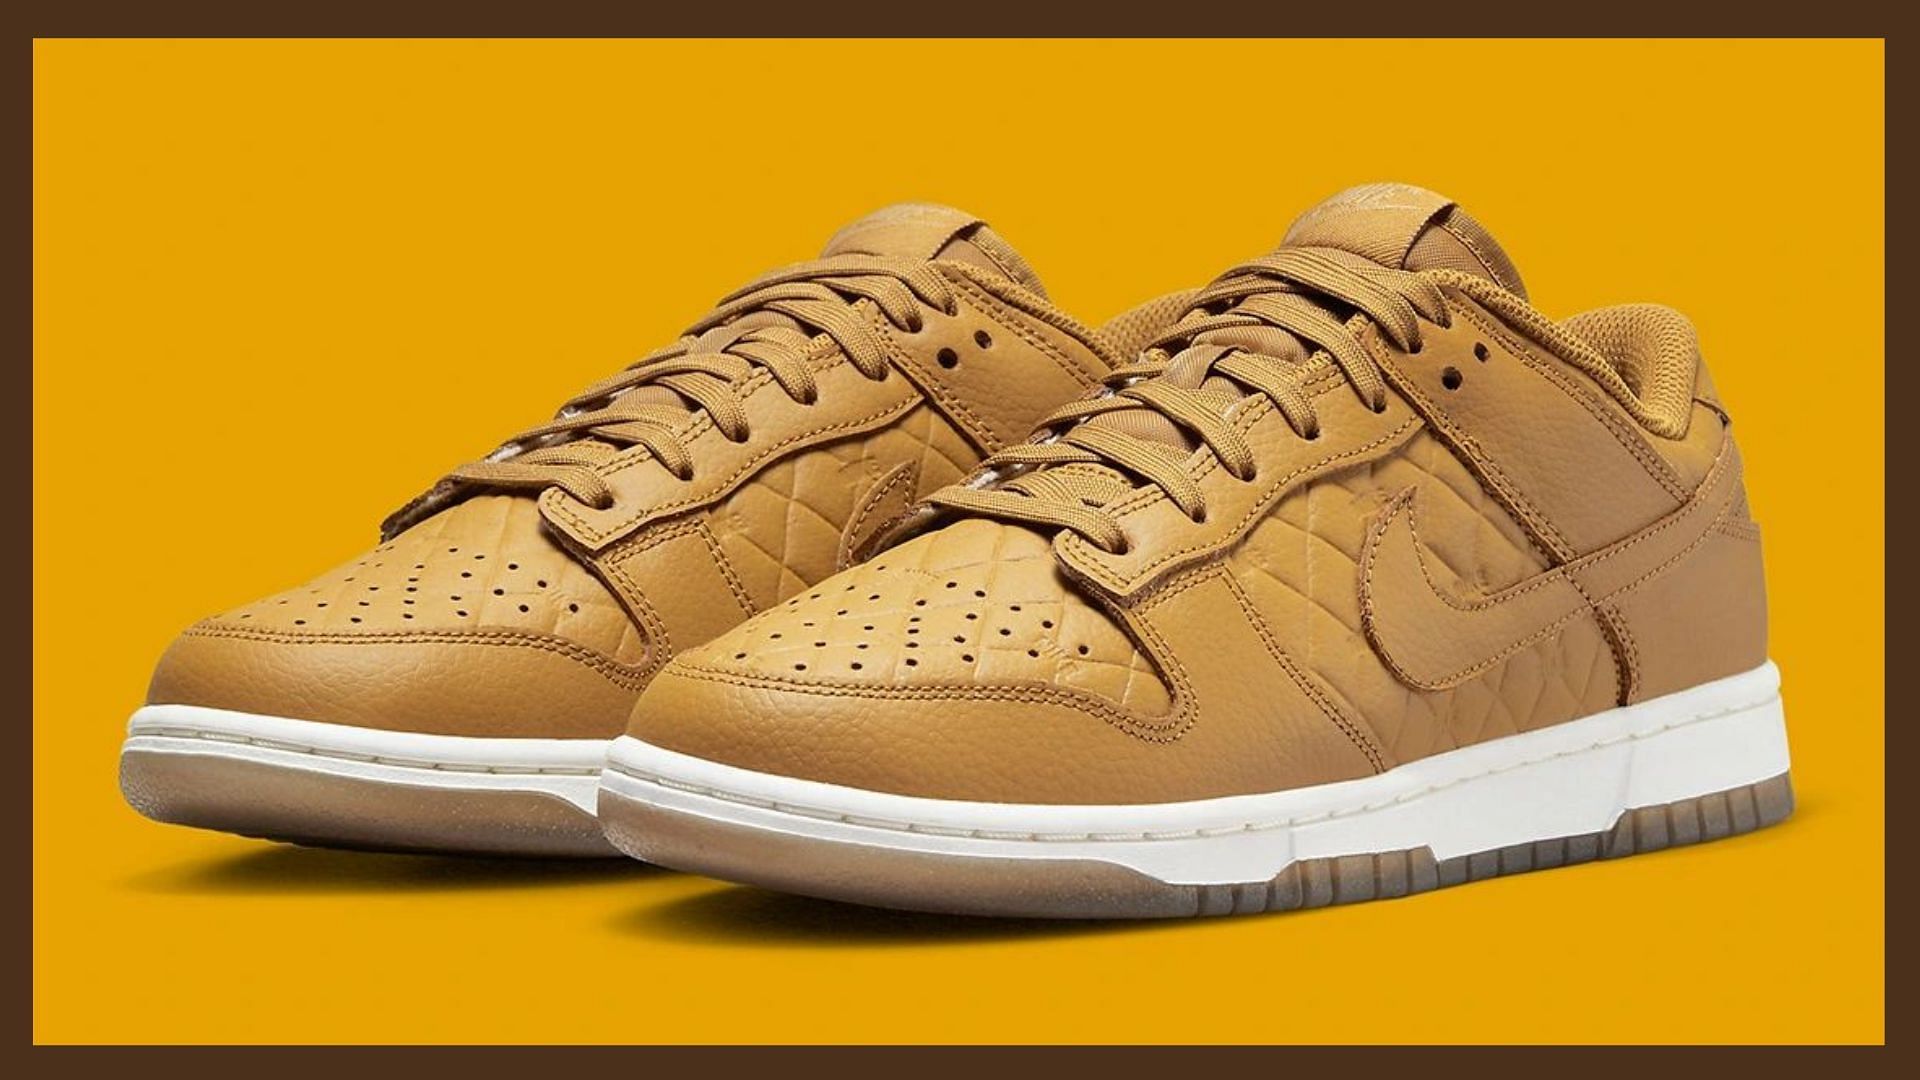 Nike Dunk Low Wheat and Gum Light Brown colorway (Image via Nike)